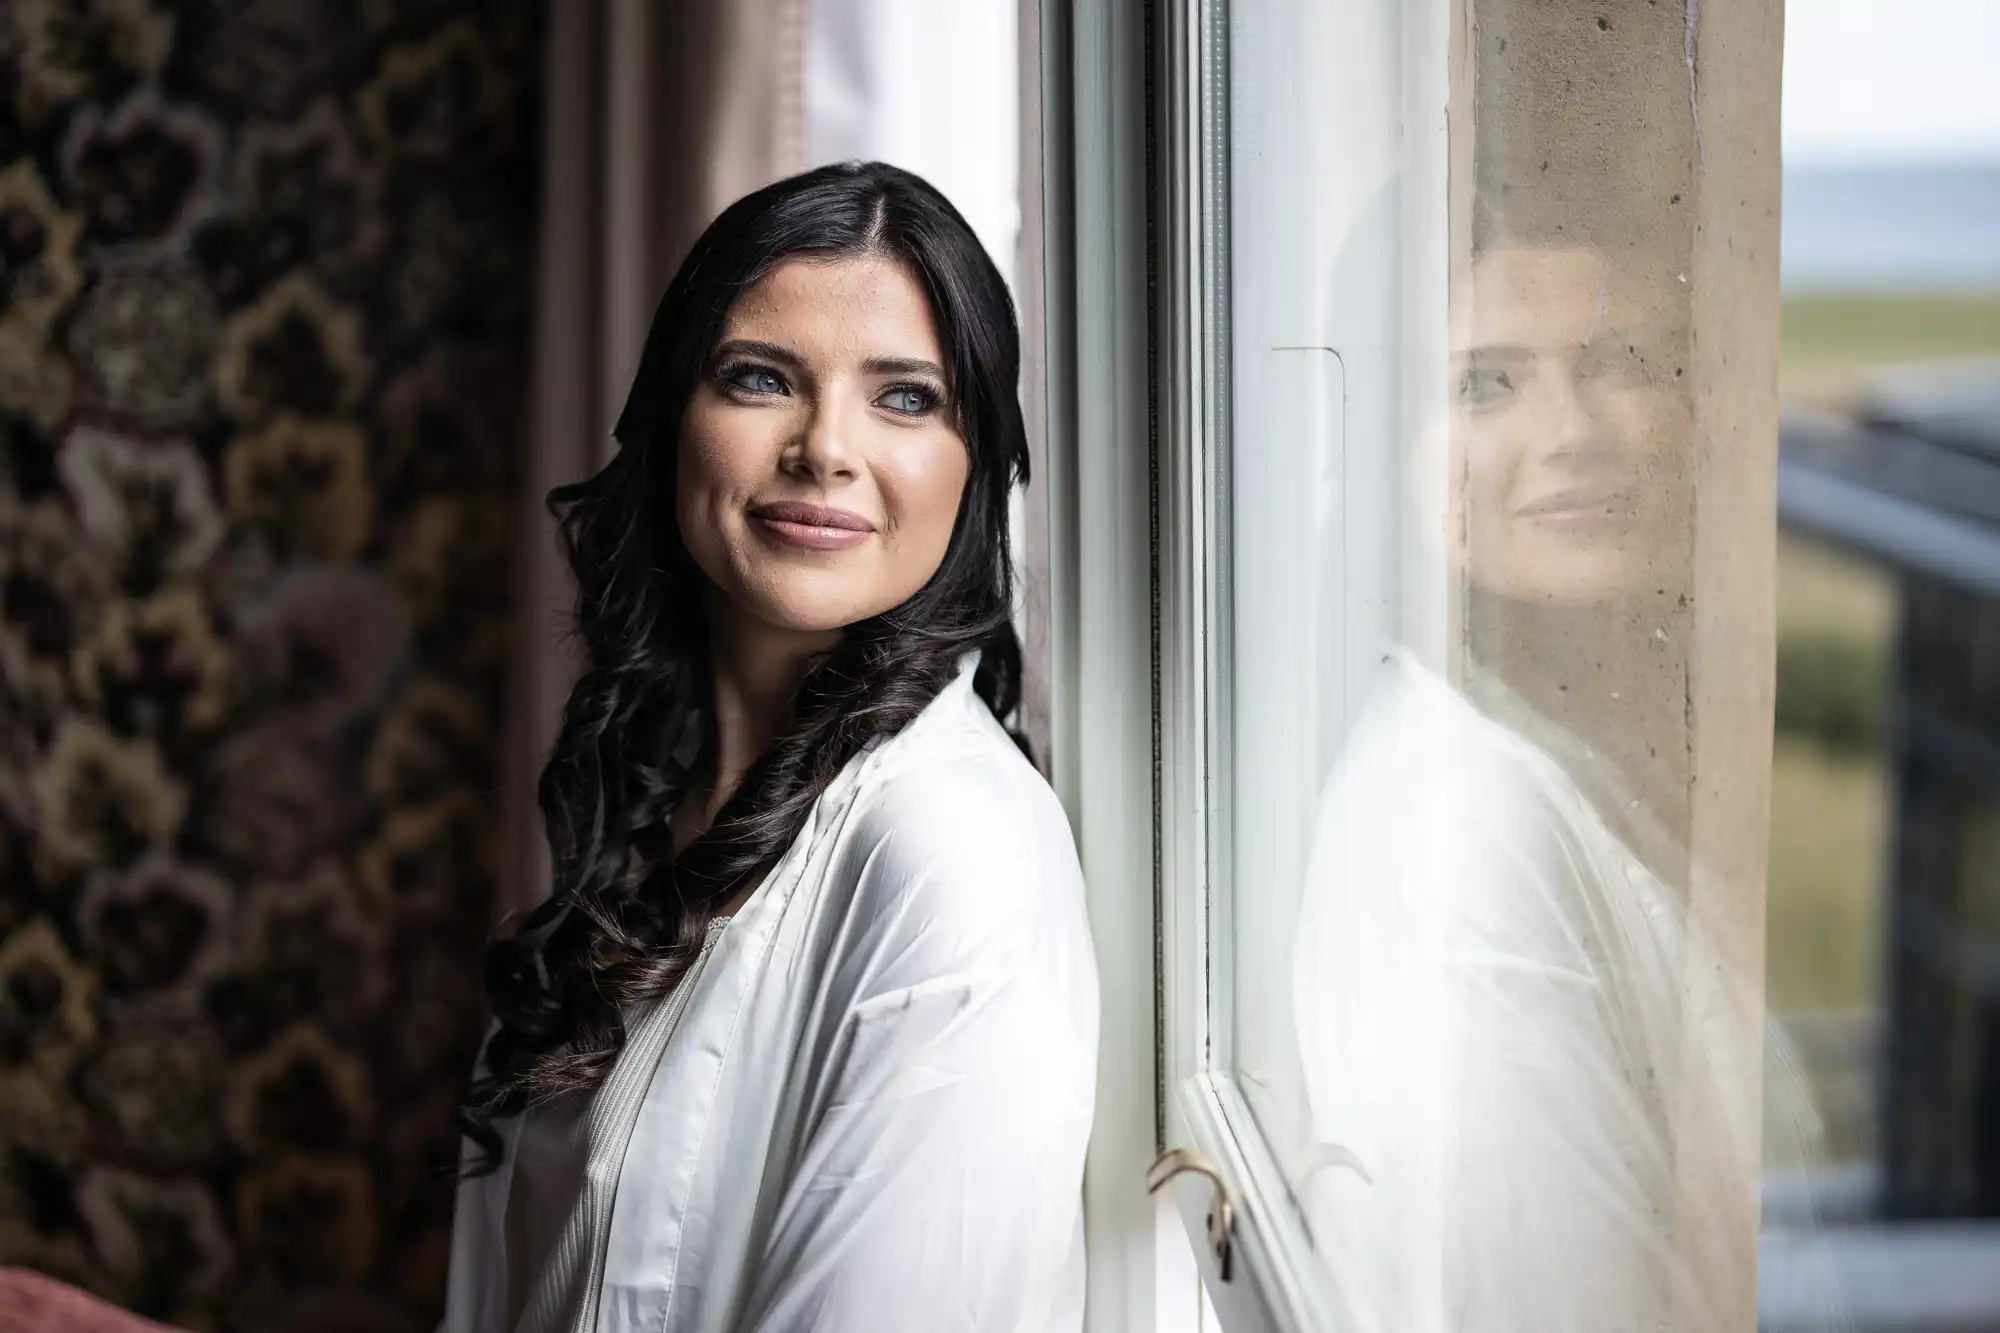 A woman with dark hair, wearing a white robe, smiling and looking away from the camera, with her reflection visible in a window beside her.